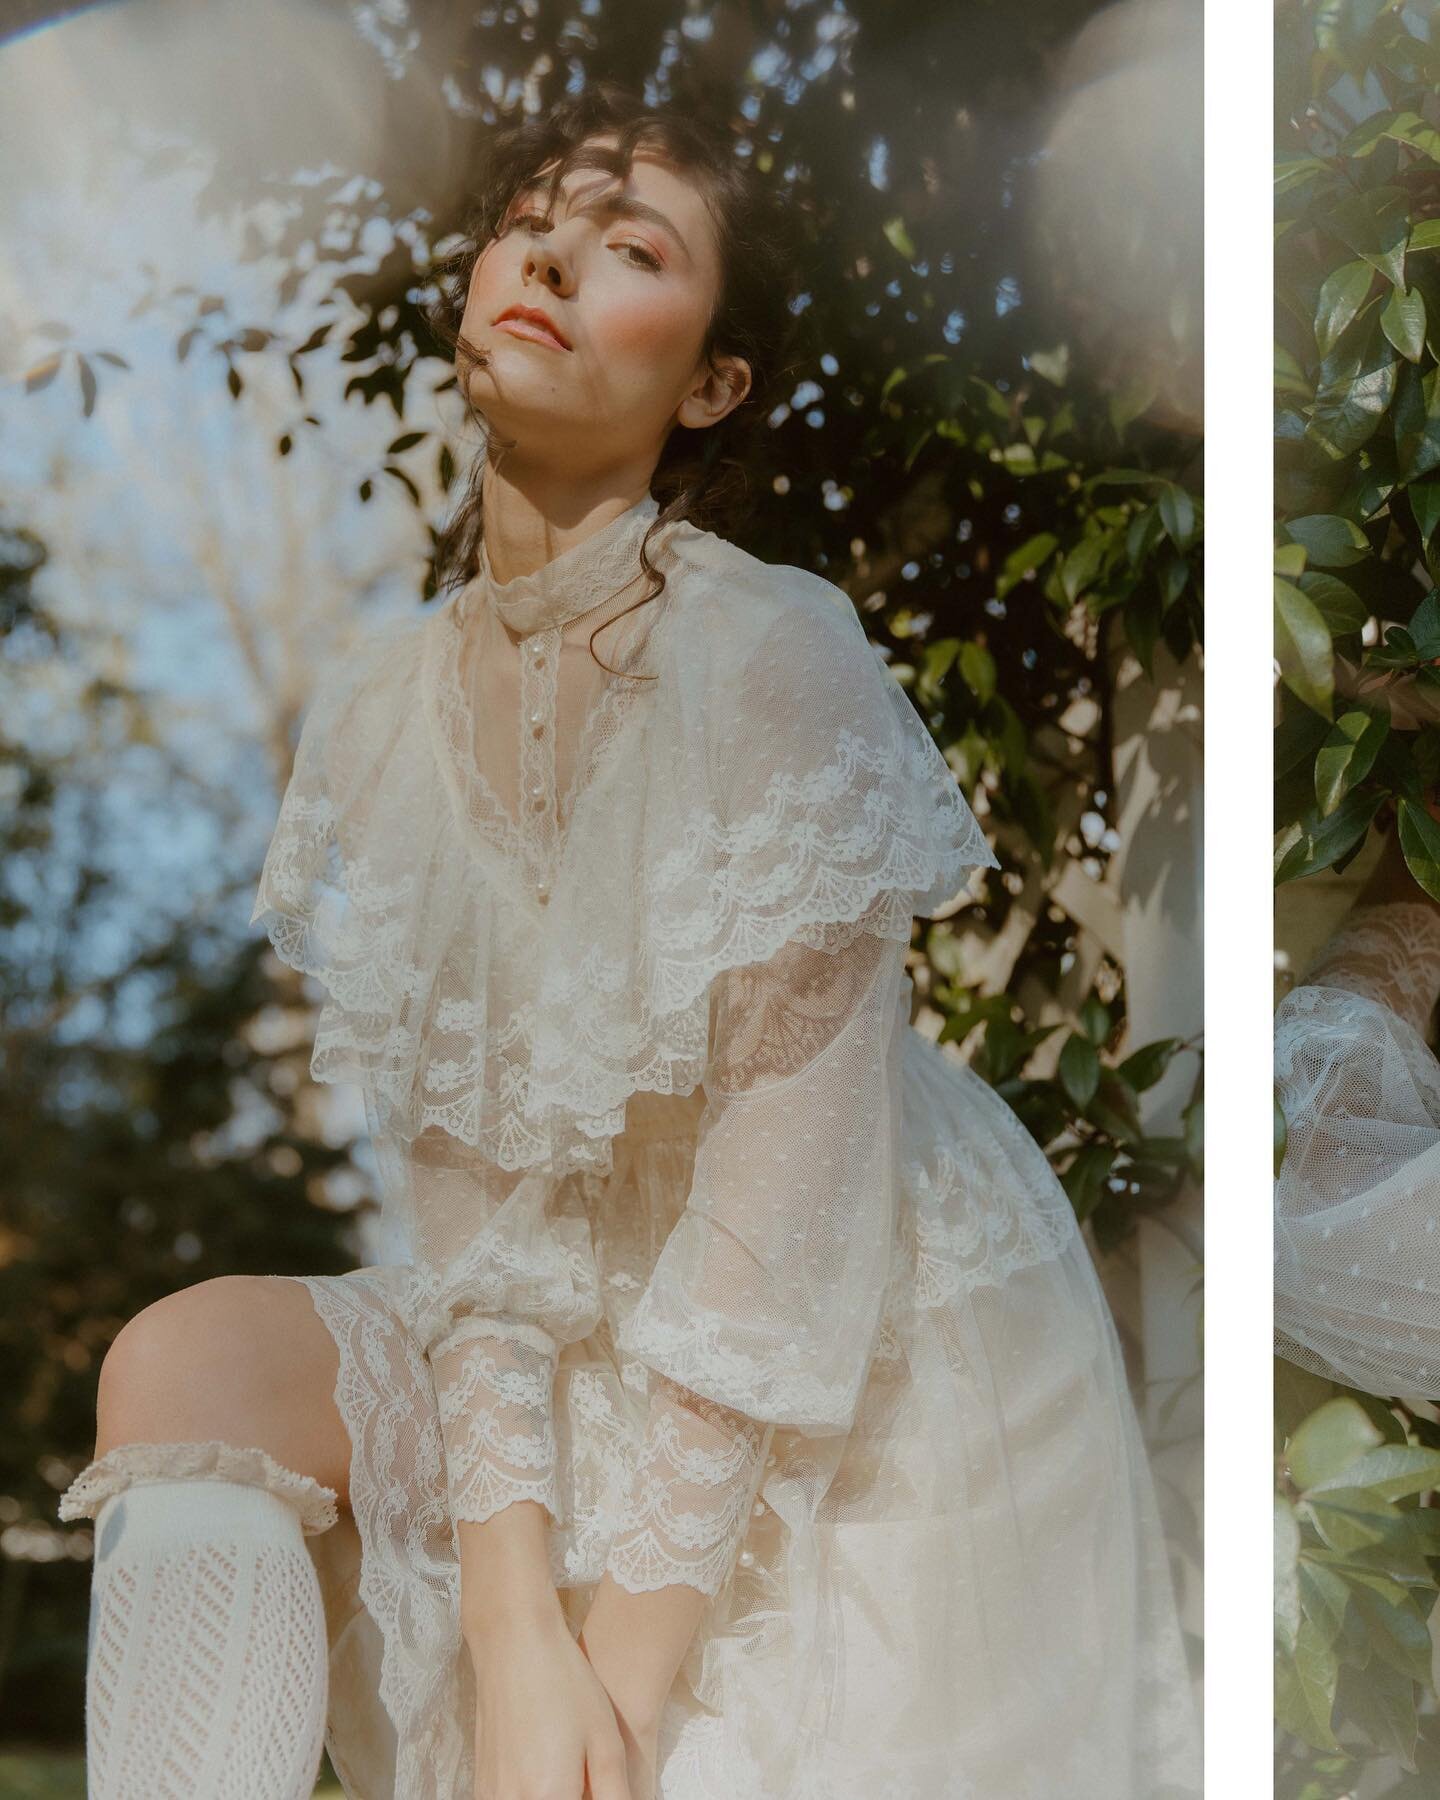 A secret garden moment. One of my fav childhood books and movies. Just cementing one of my childhood core memories in the form of a shoot straight to my heart. 😌💖

Thanks for bringing my dreams to life with your elegance @alsotiffanyfajen and the t